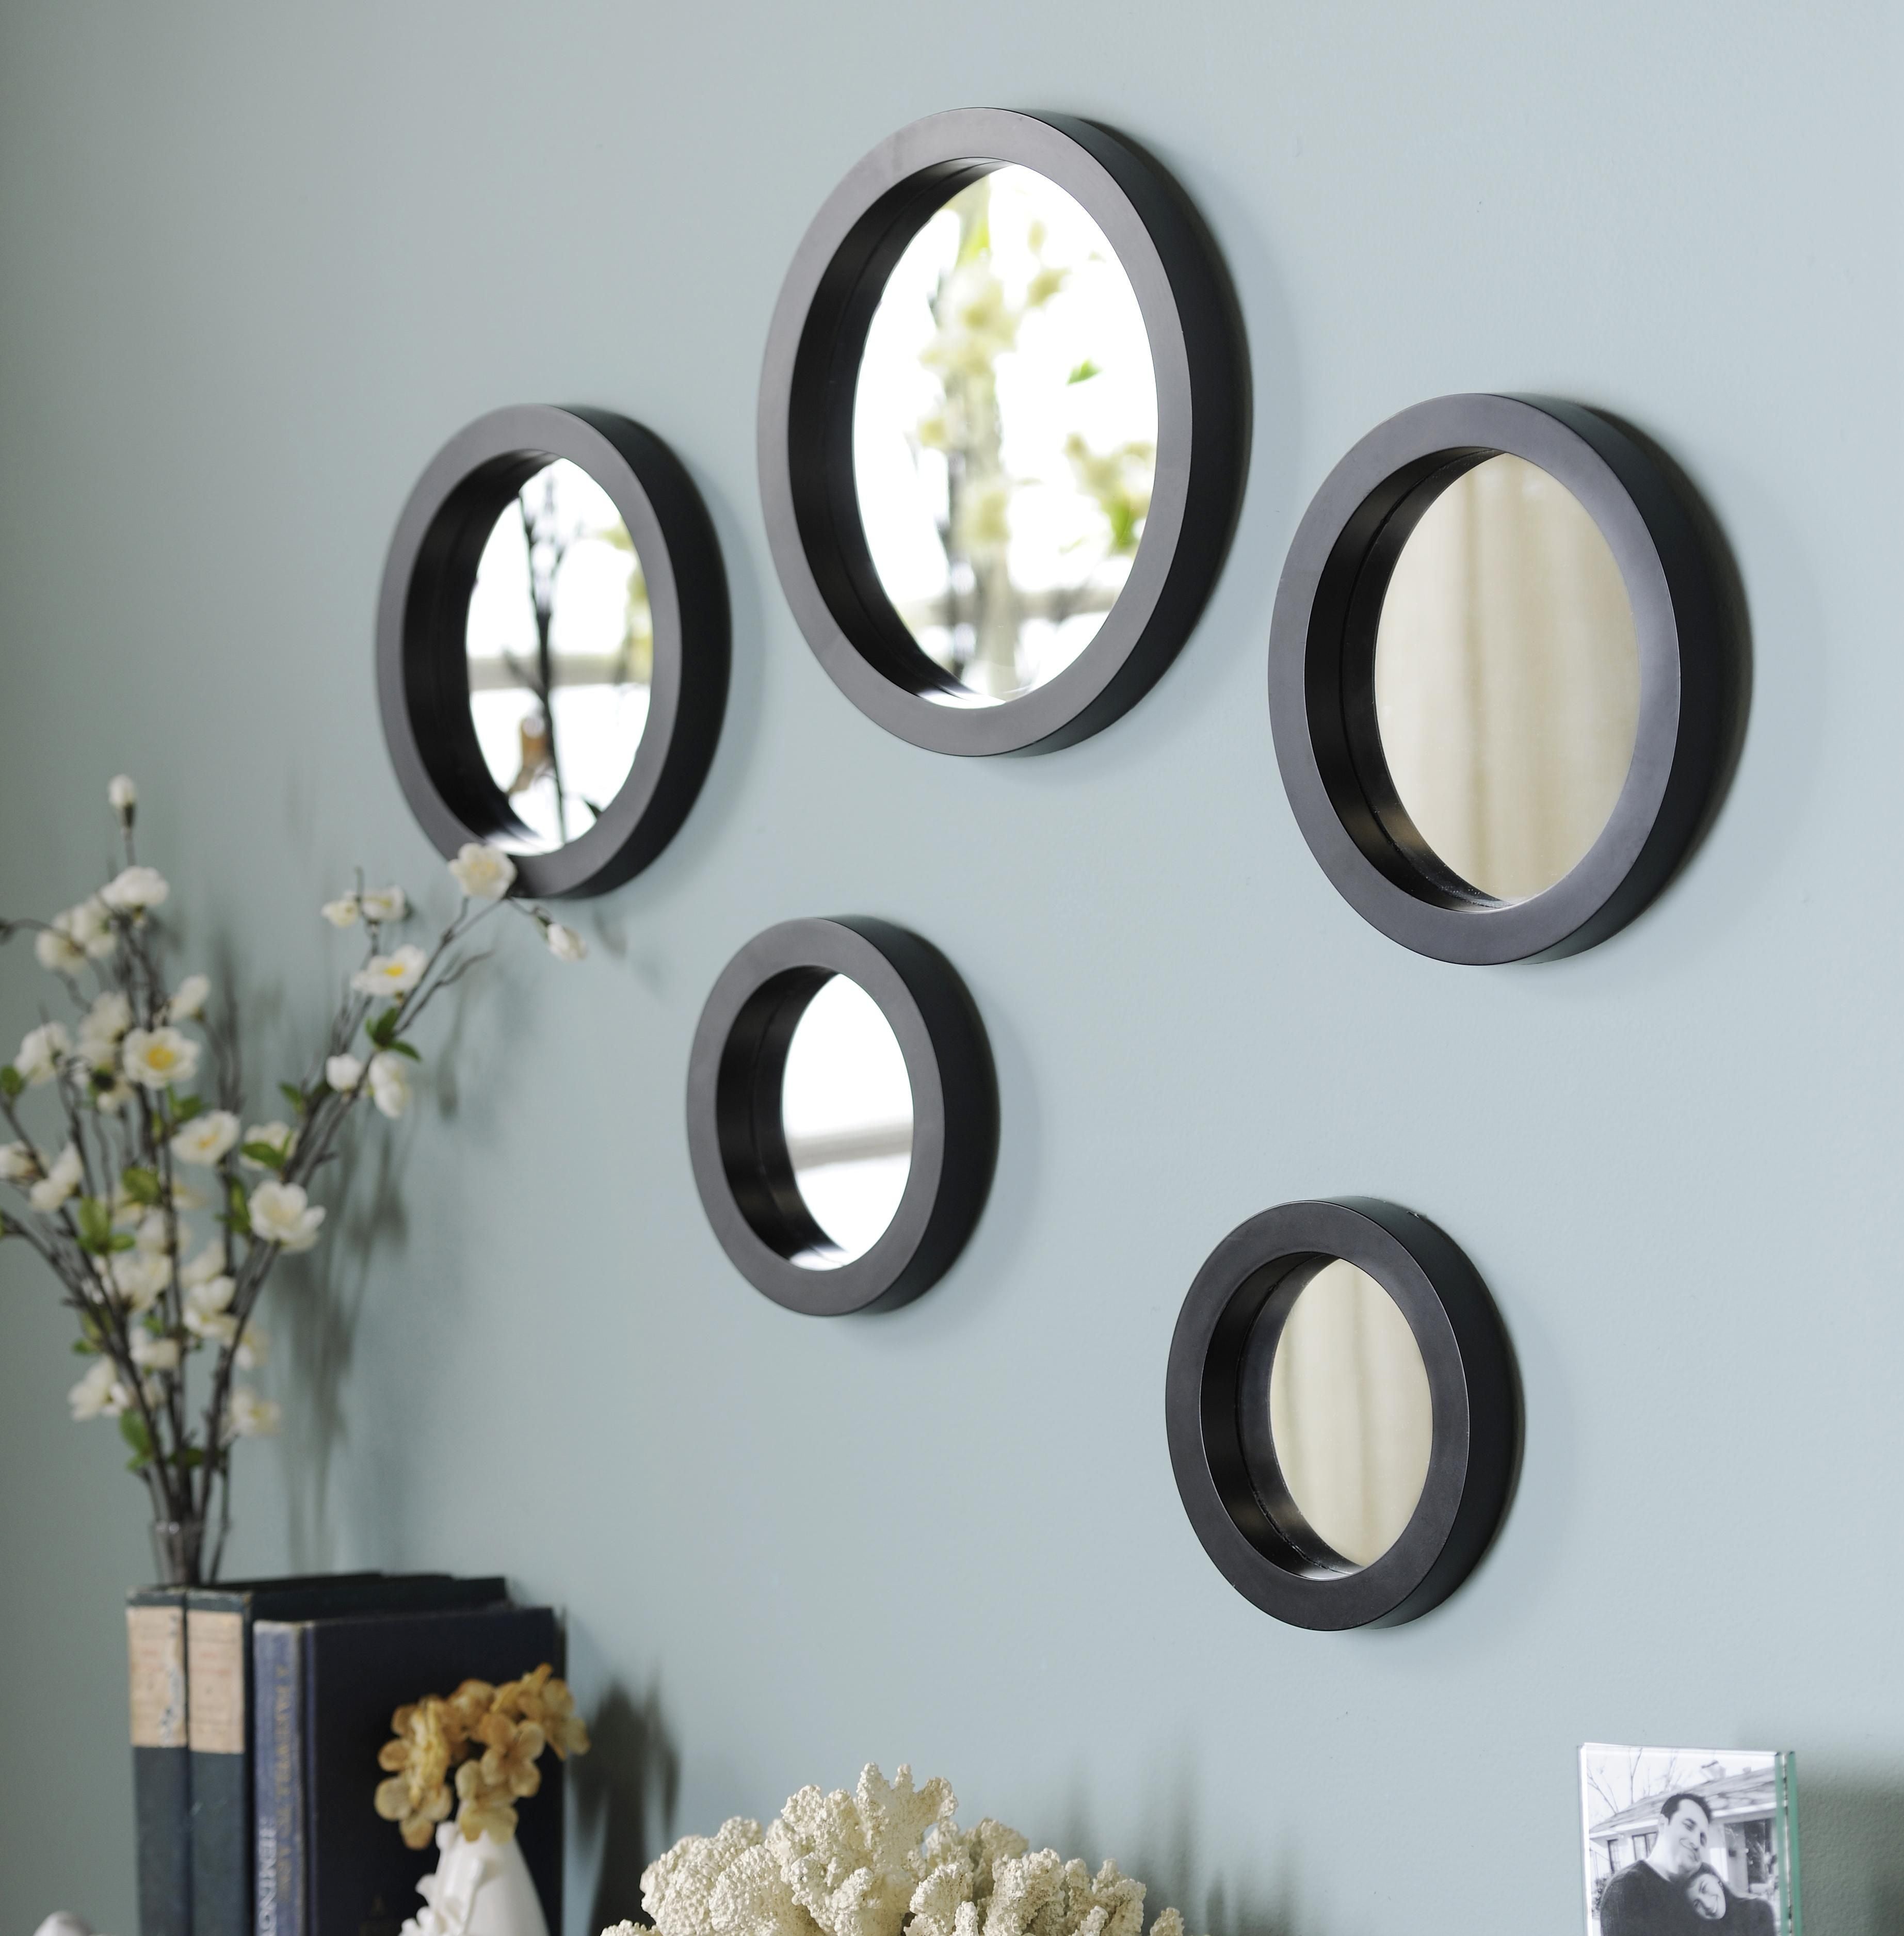 5 Piece Mirror Wall Decoration Home Office Garden | HOG-HomeOfficeGarden | HOG-Home.Office.Garden